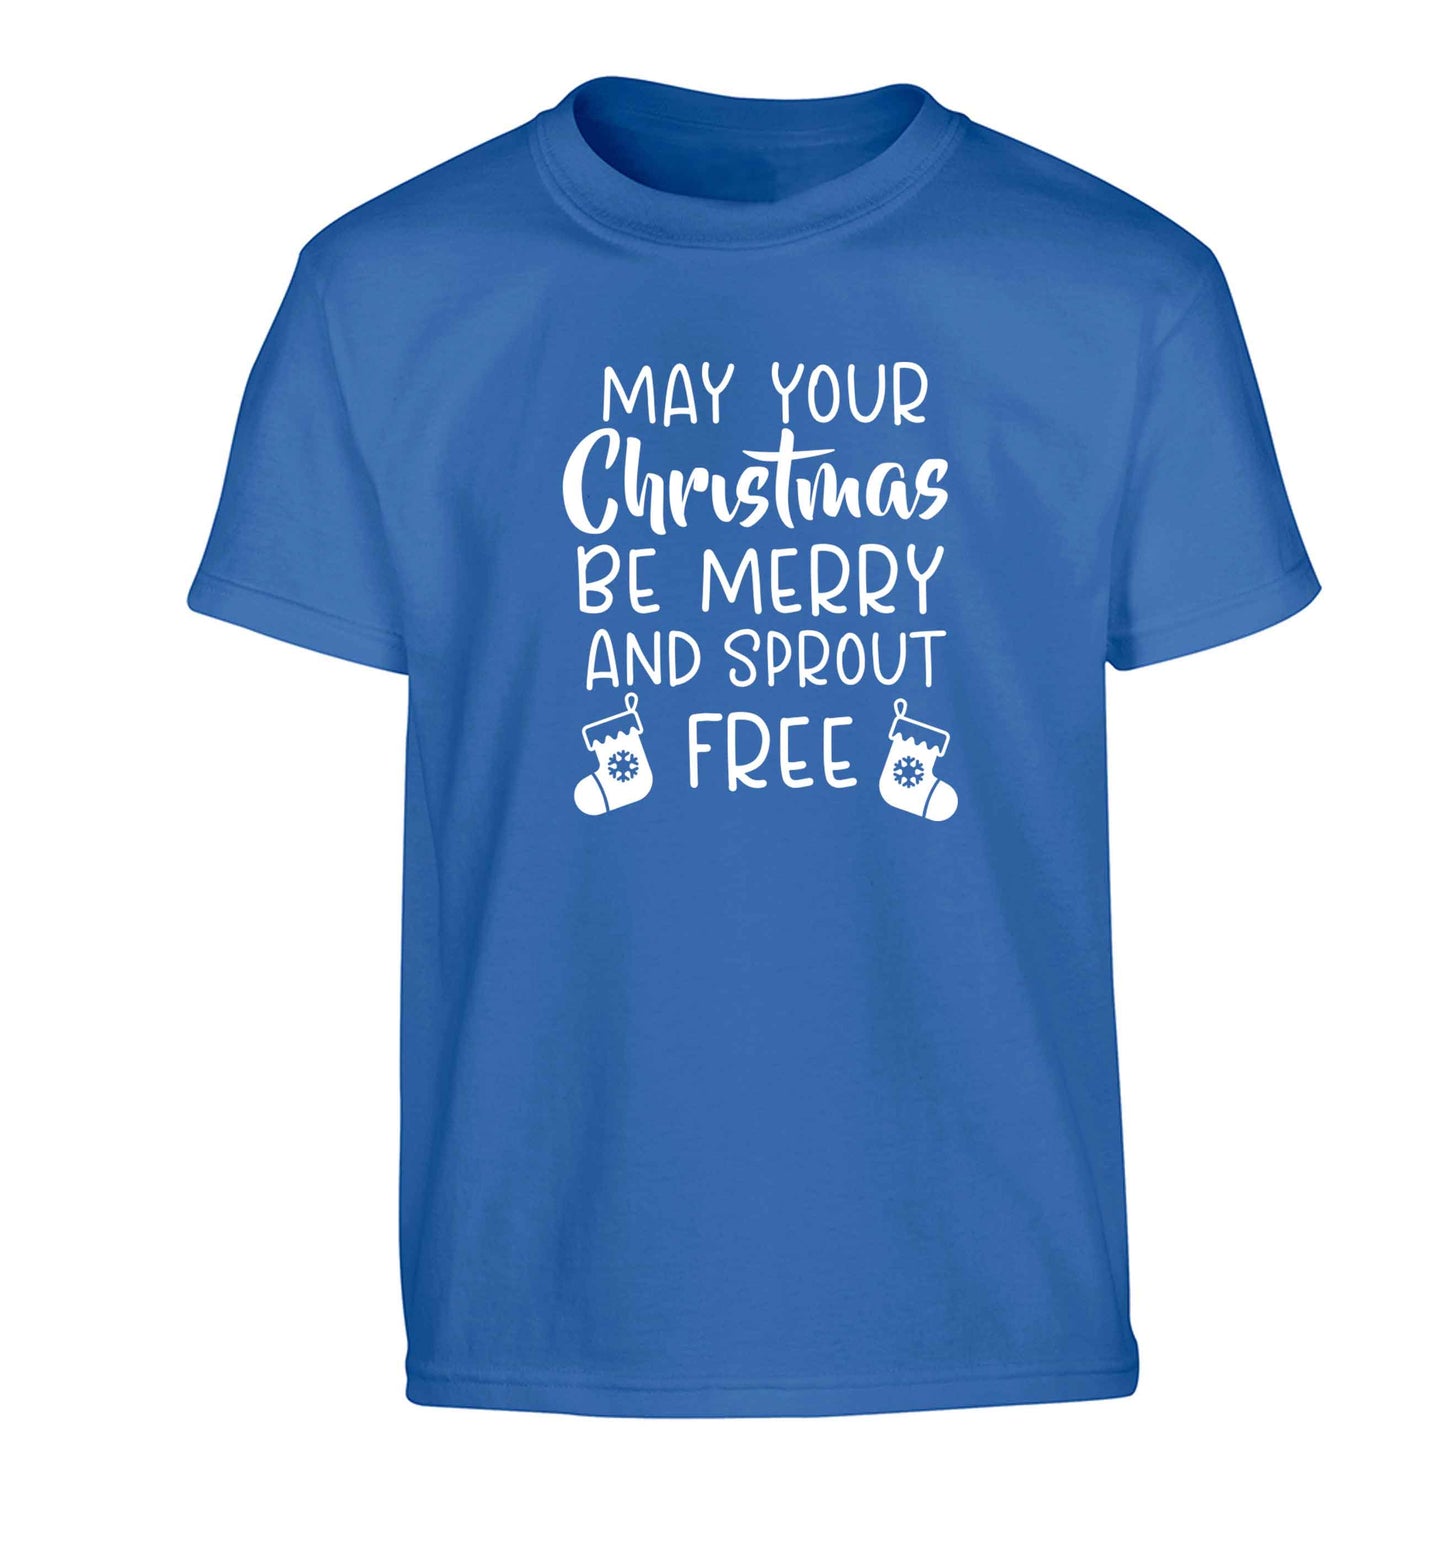 May your Christmas be merry and sprout free Children's blue Tshirt 12-13 Years